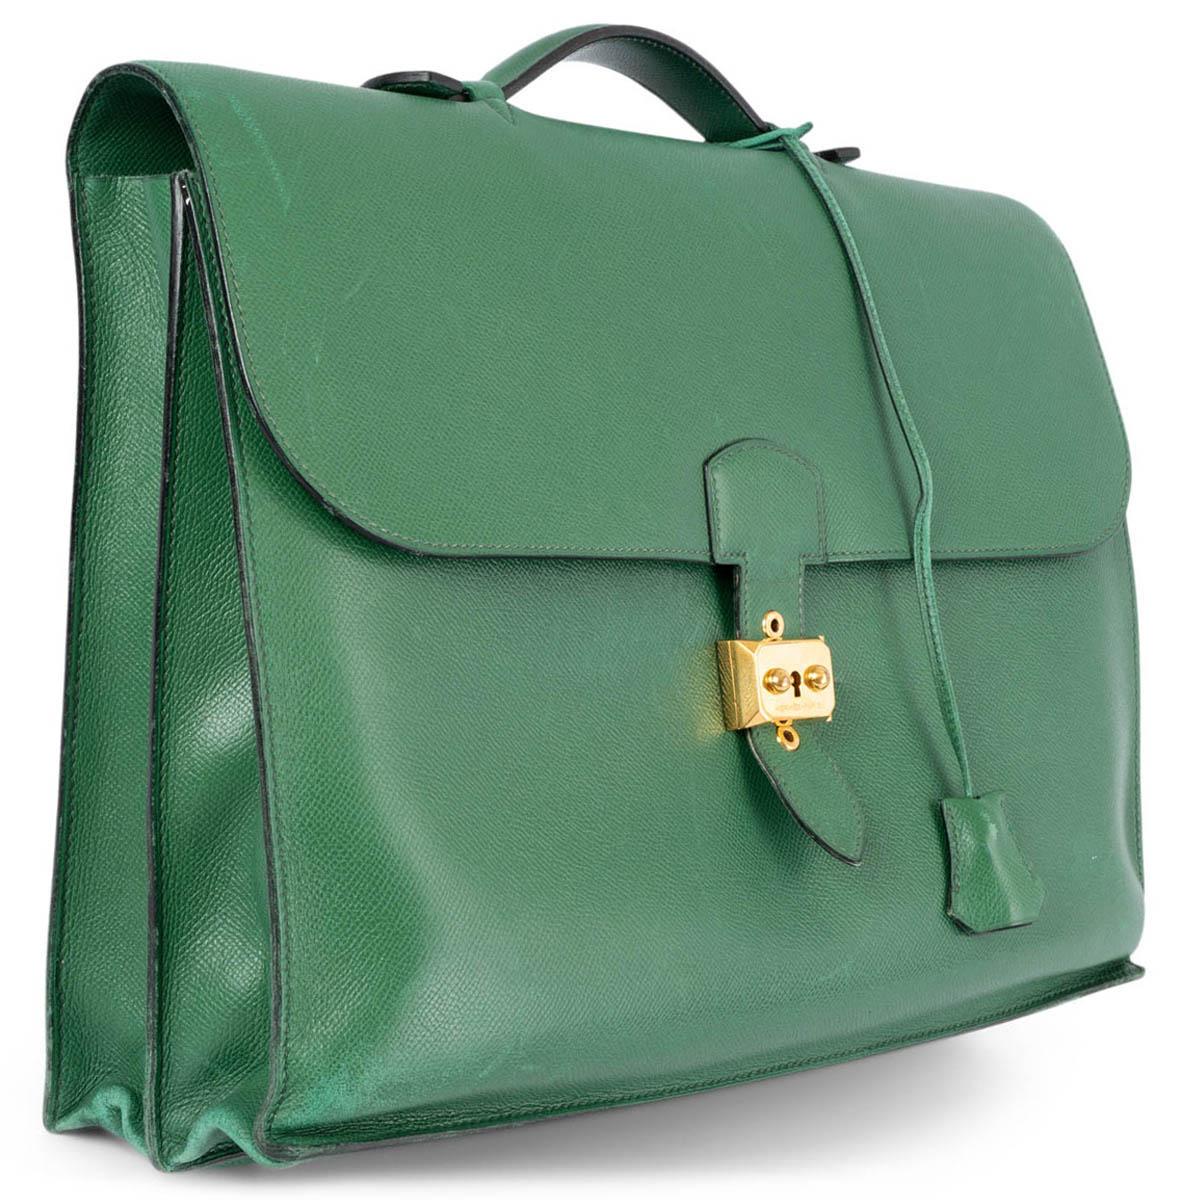 100% authentic Hermès Sac a Depeches 2-38 briefcase in Vert Claire green Veau Courchevel leather featuring gold-plated flip-lock buckle. Interior is unlined and has two main compartments and a big flat pocket on front under the flap. Vintage - has